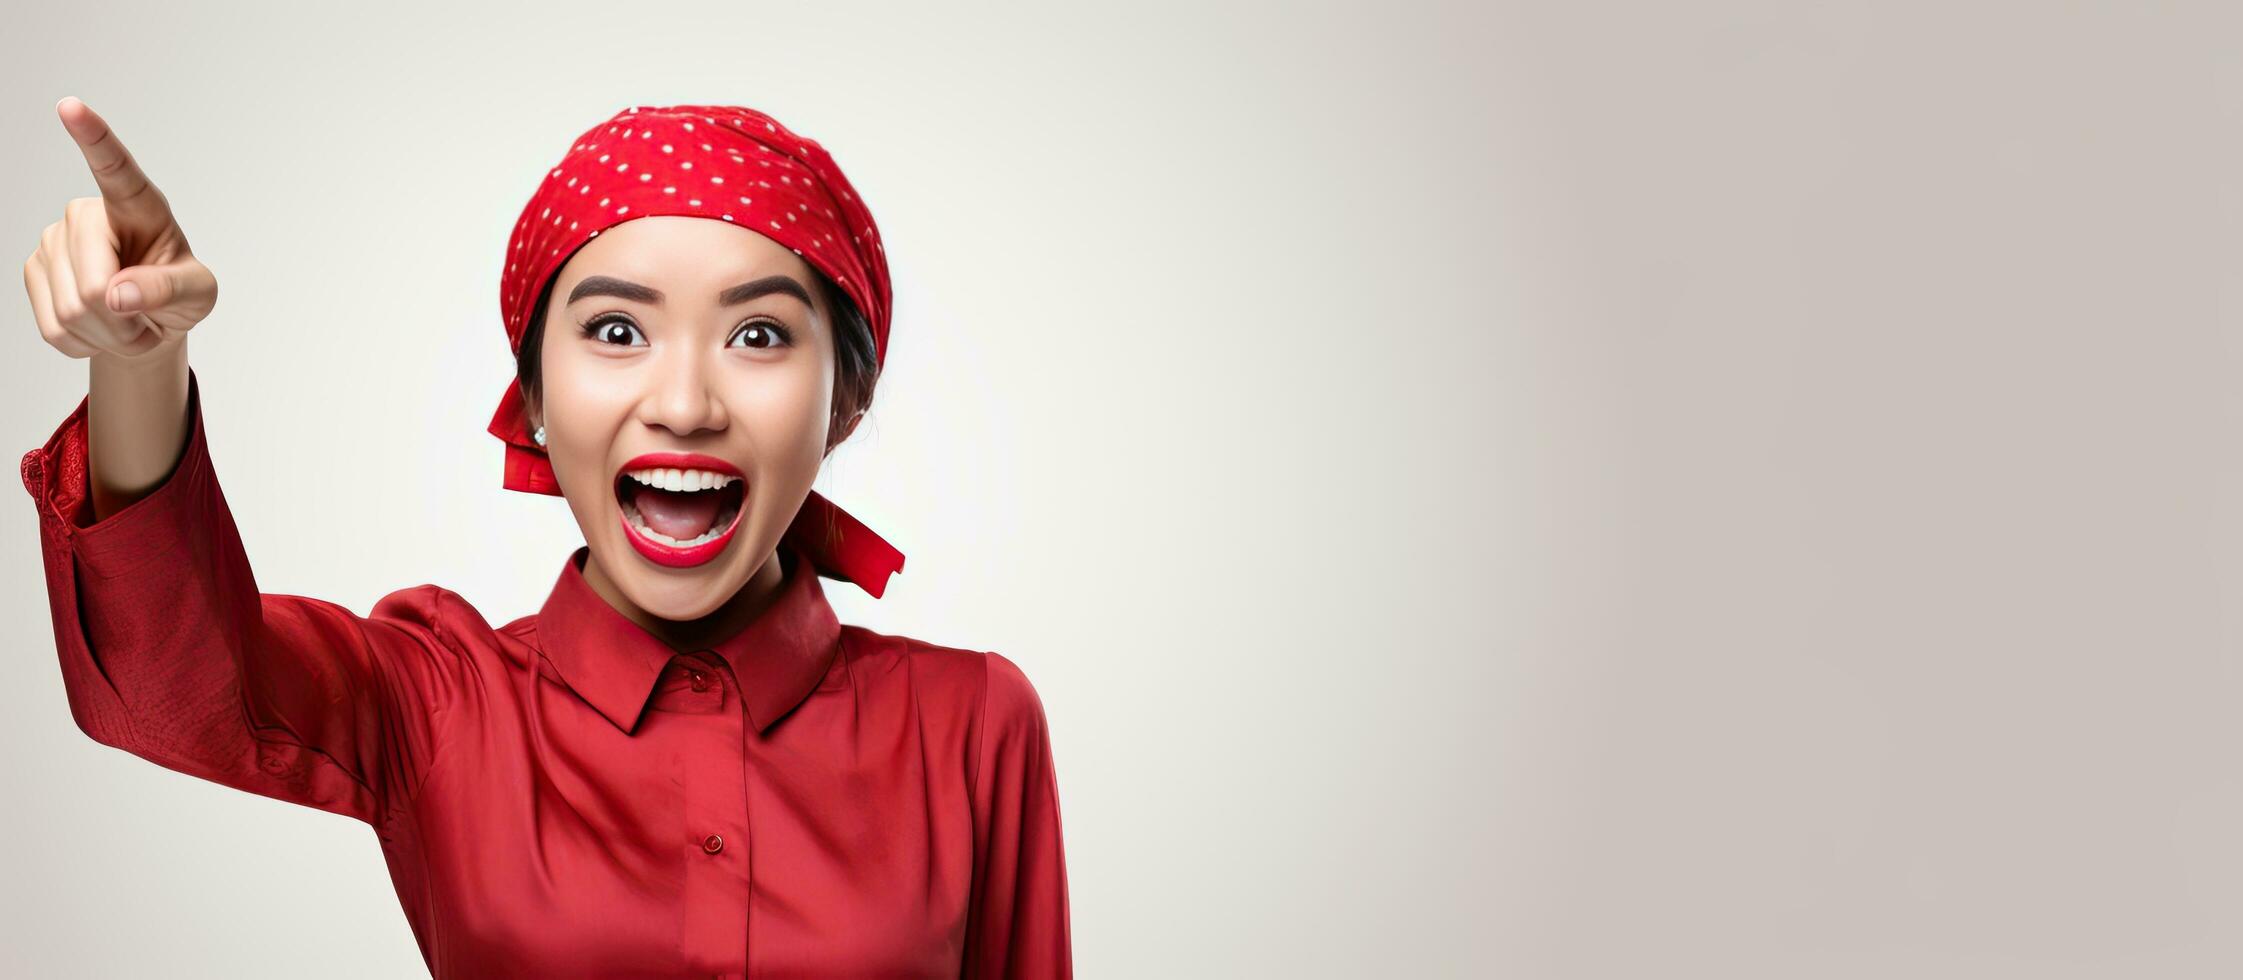 Asian woman in red kebaya and flag headband pointing at empty space above her on white background looking enthusiastic photo